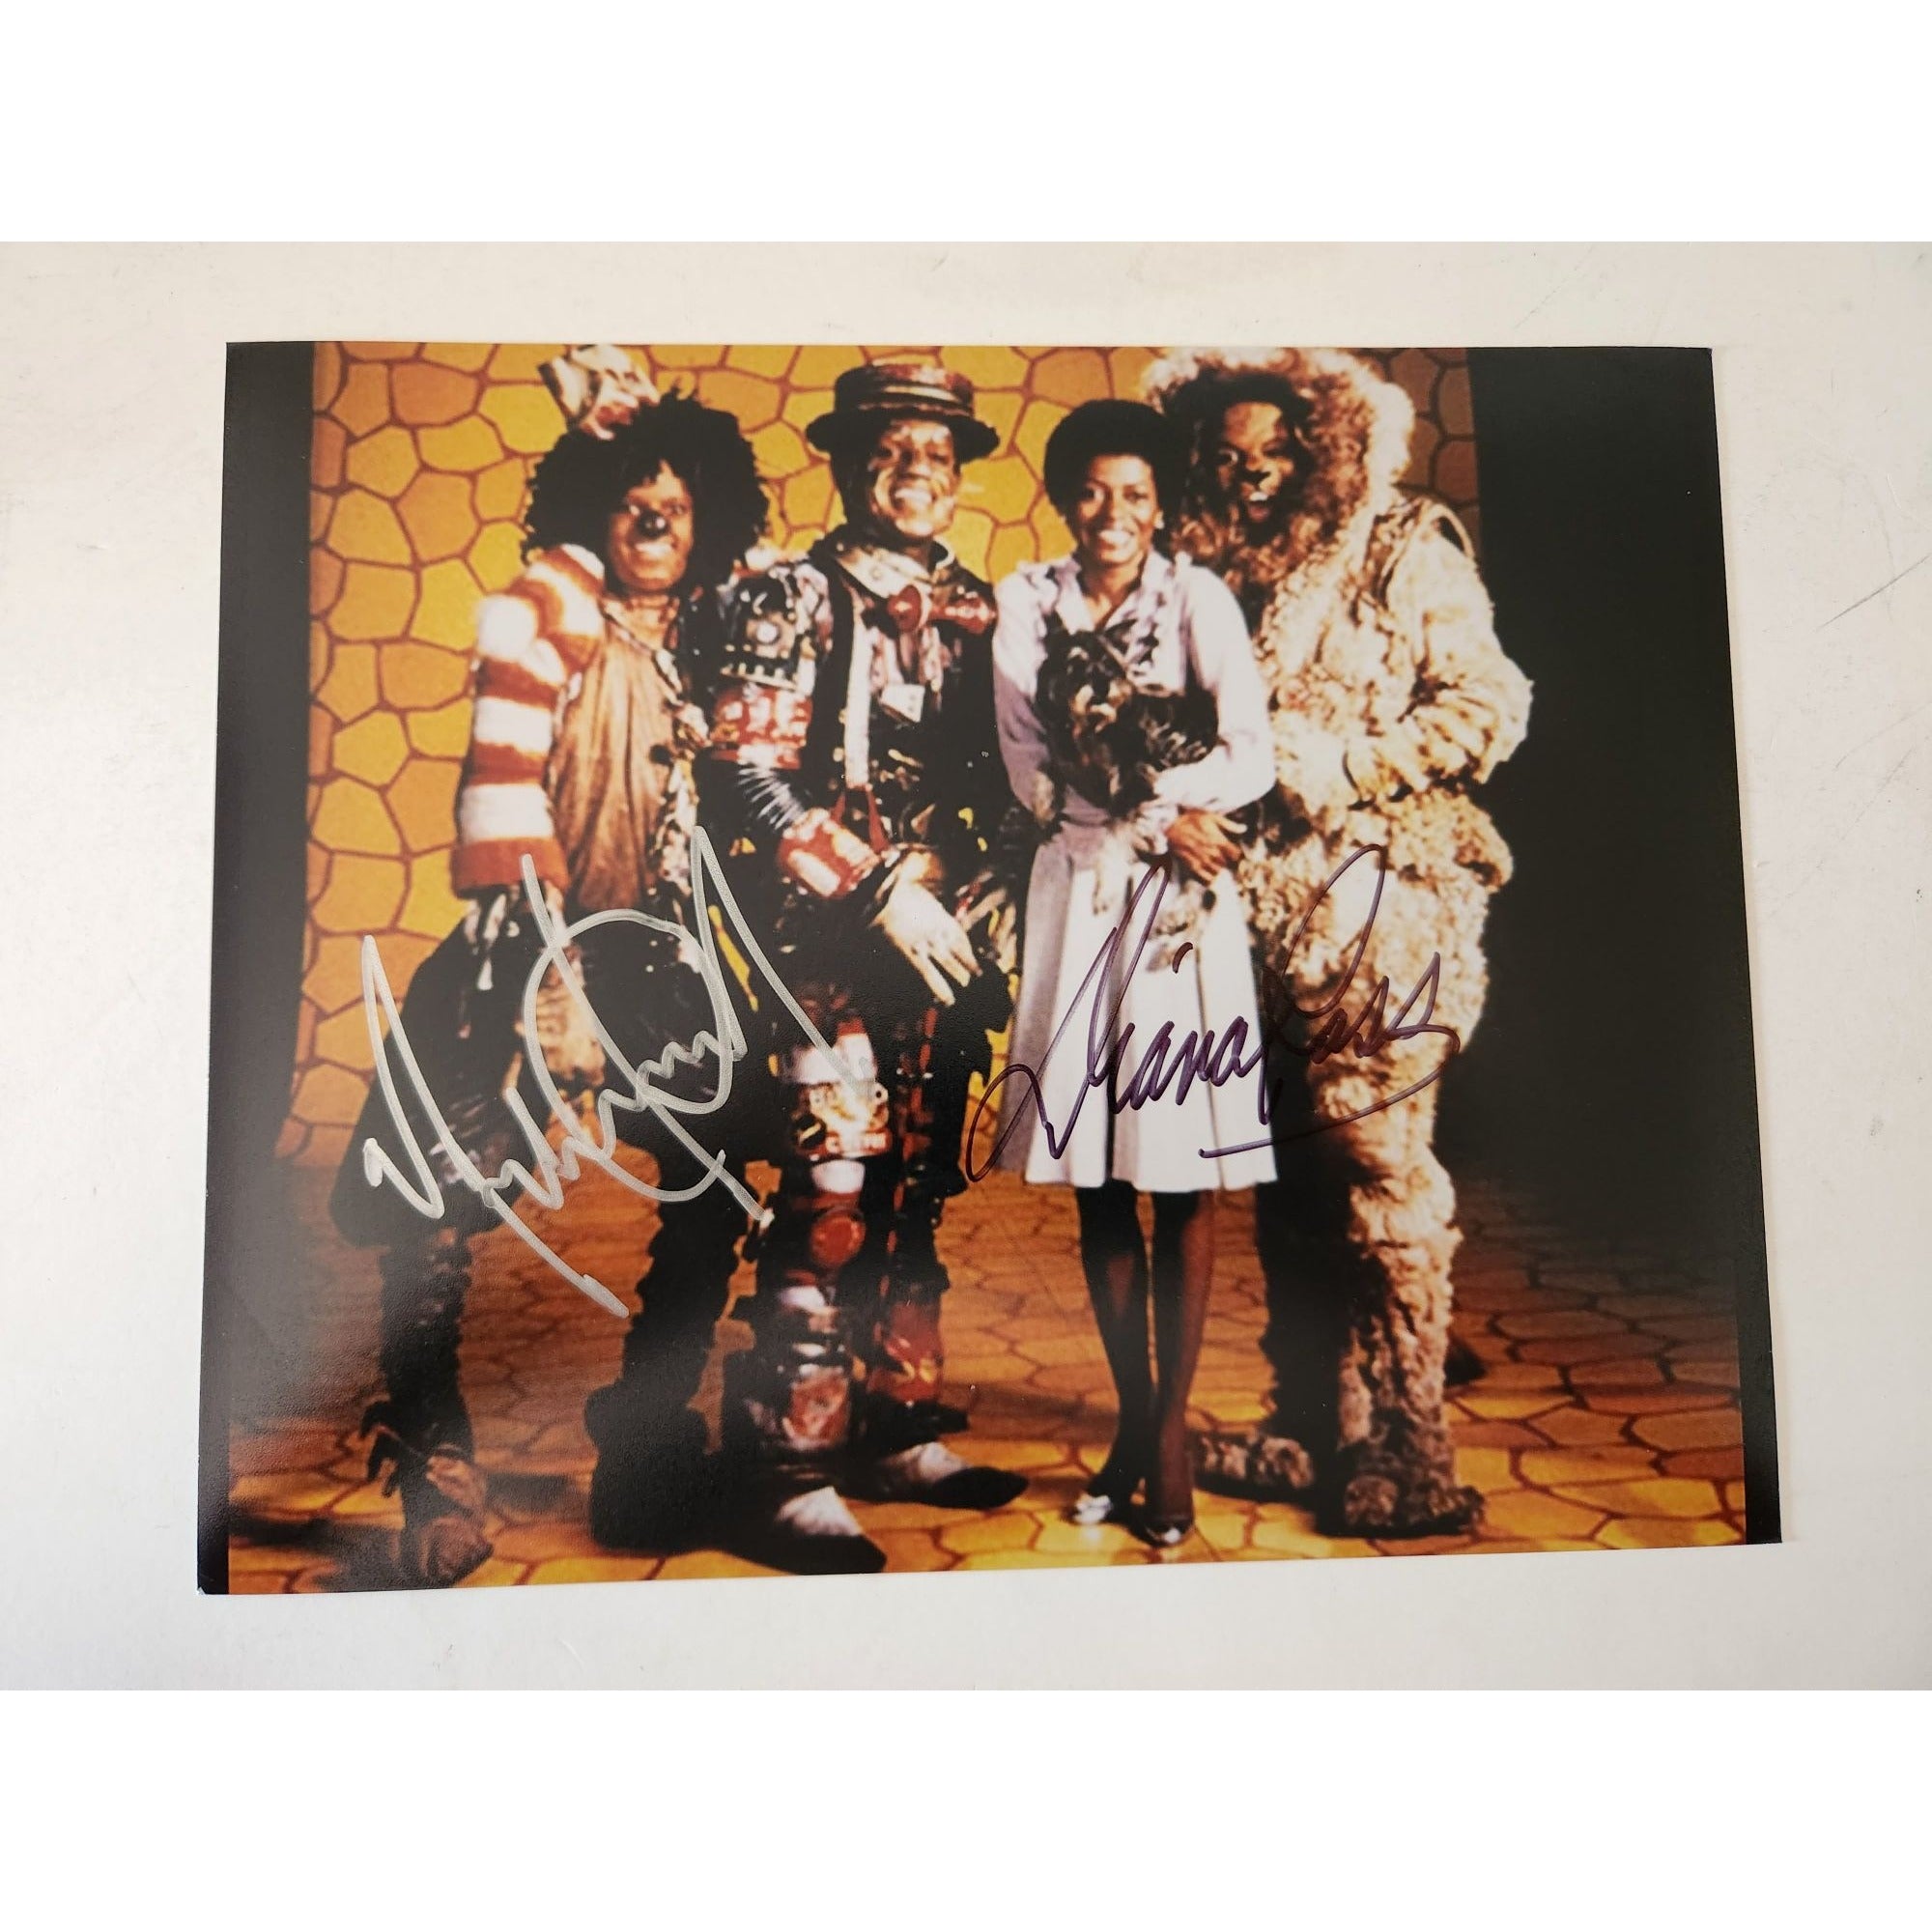 Michael Jackson and Diana Ross 8x10 photo signed with proof